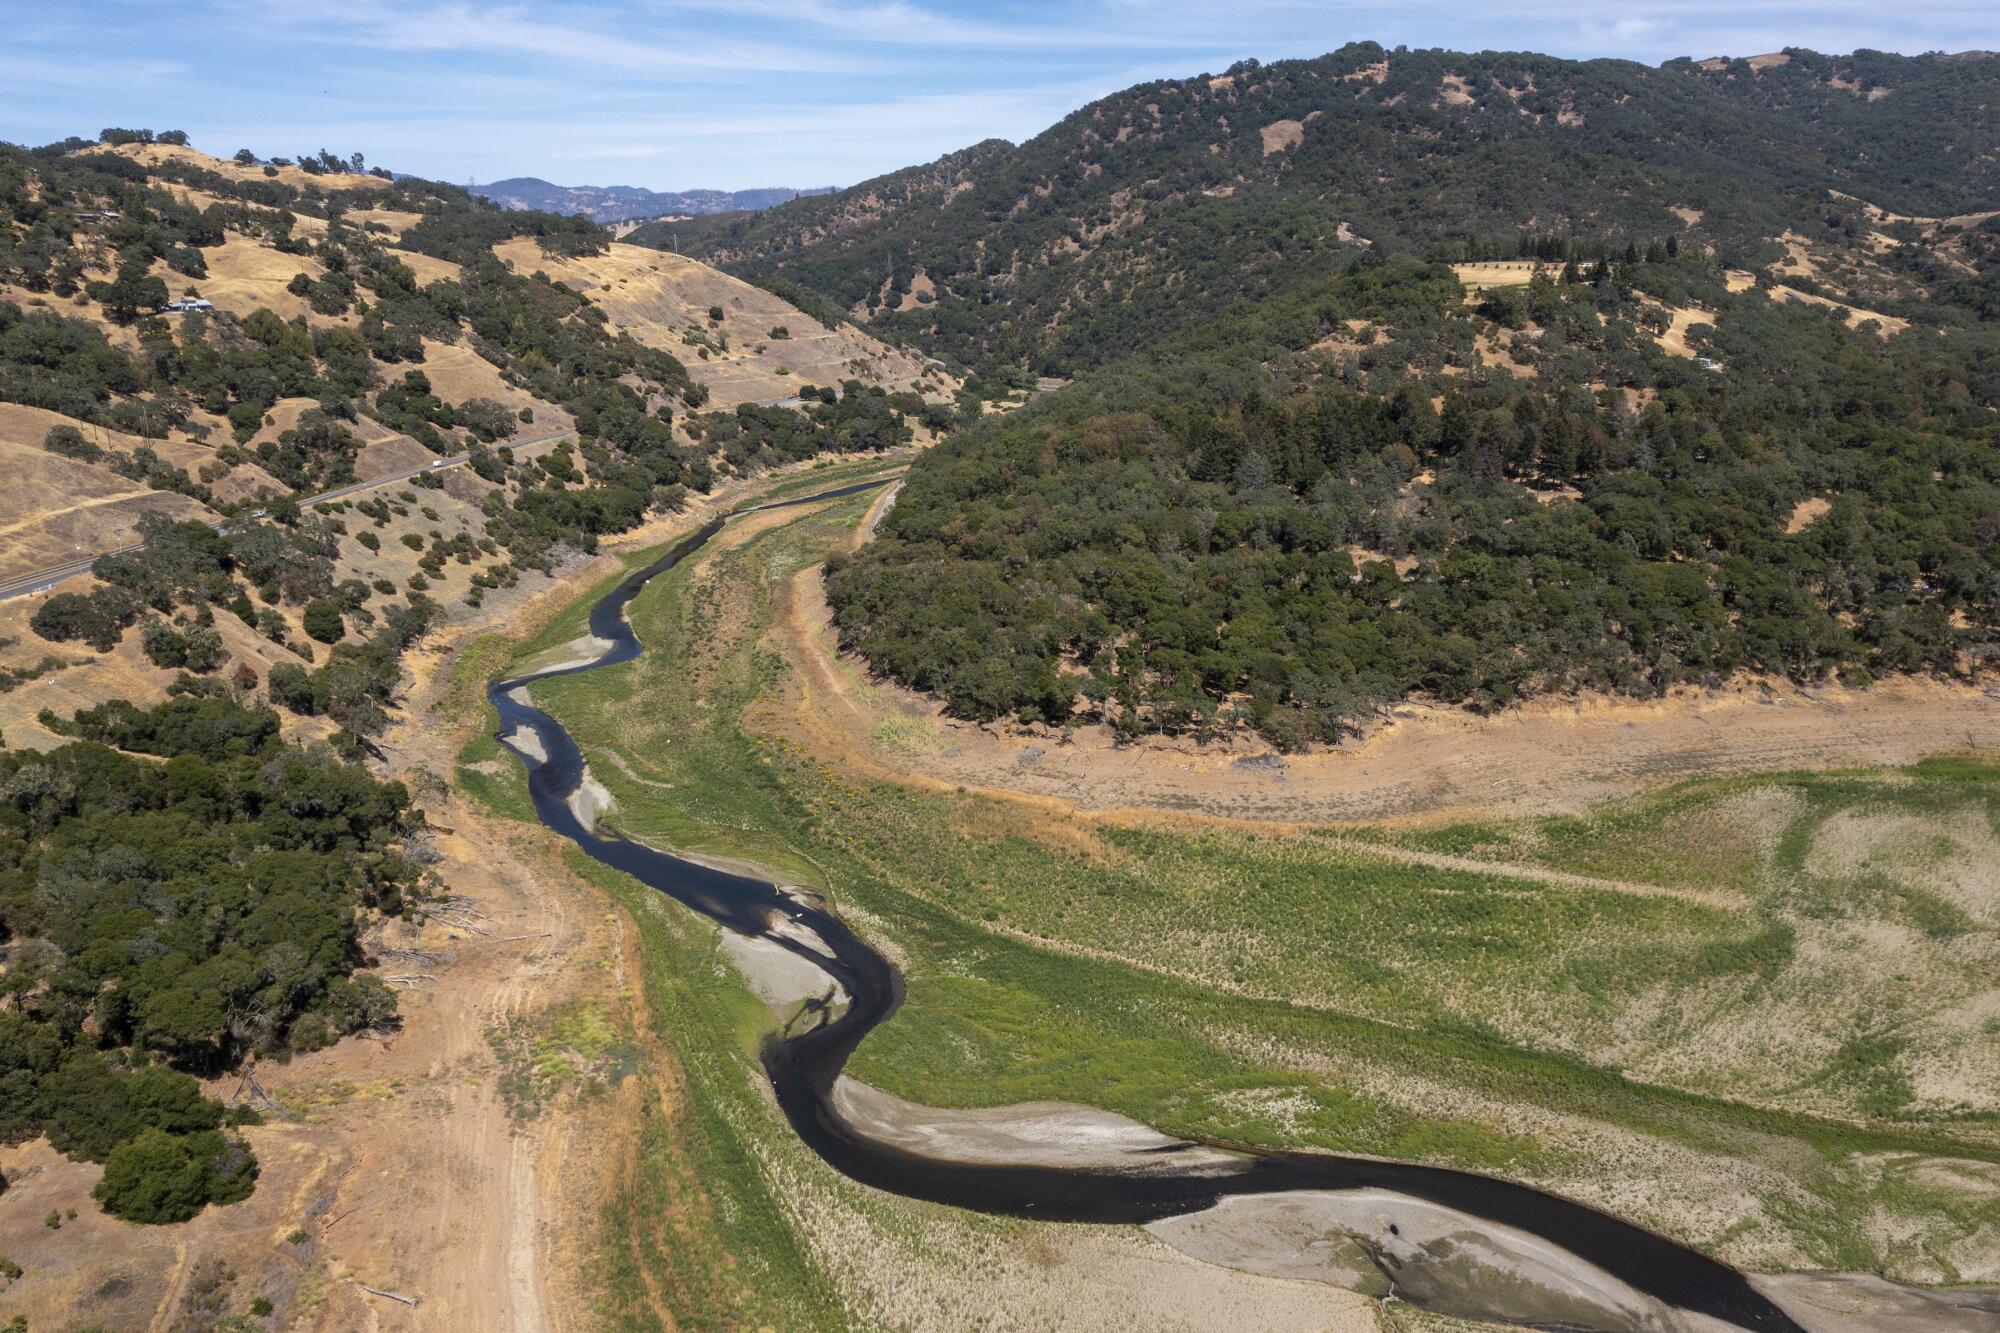 The Russian River, just north of drought-stricken Lake Mendocino in Ukiah, Calif.